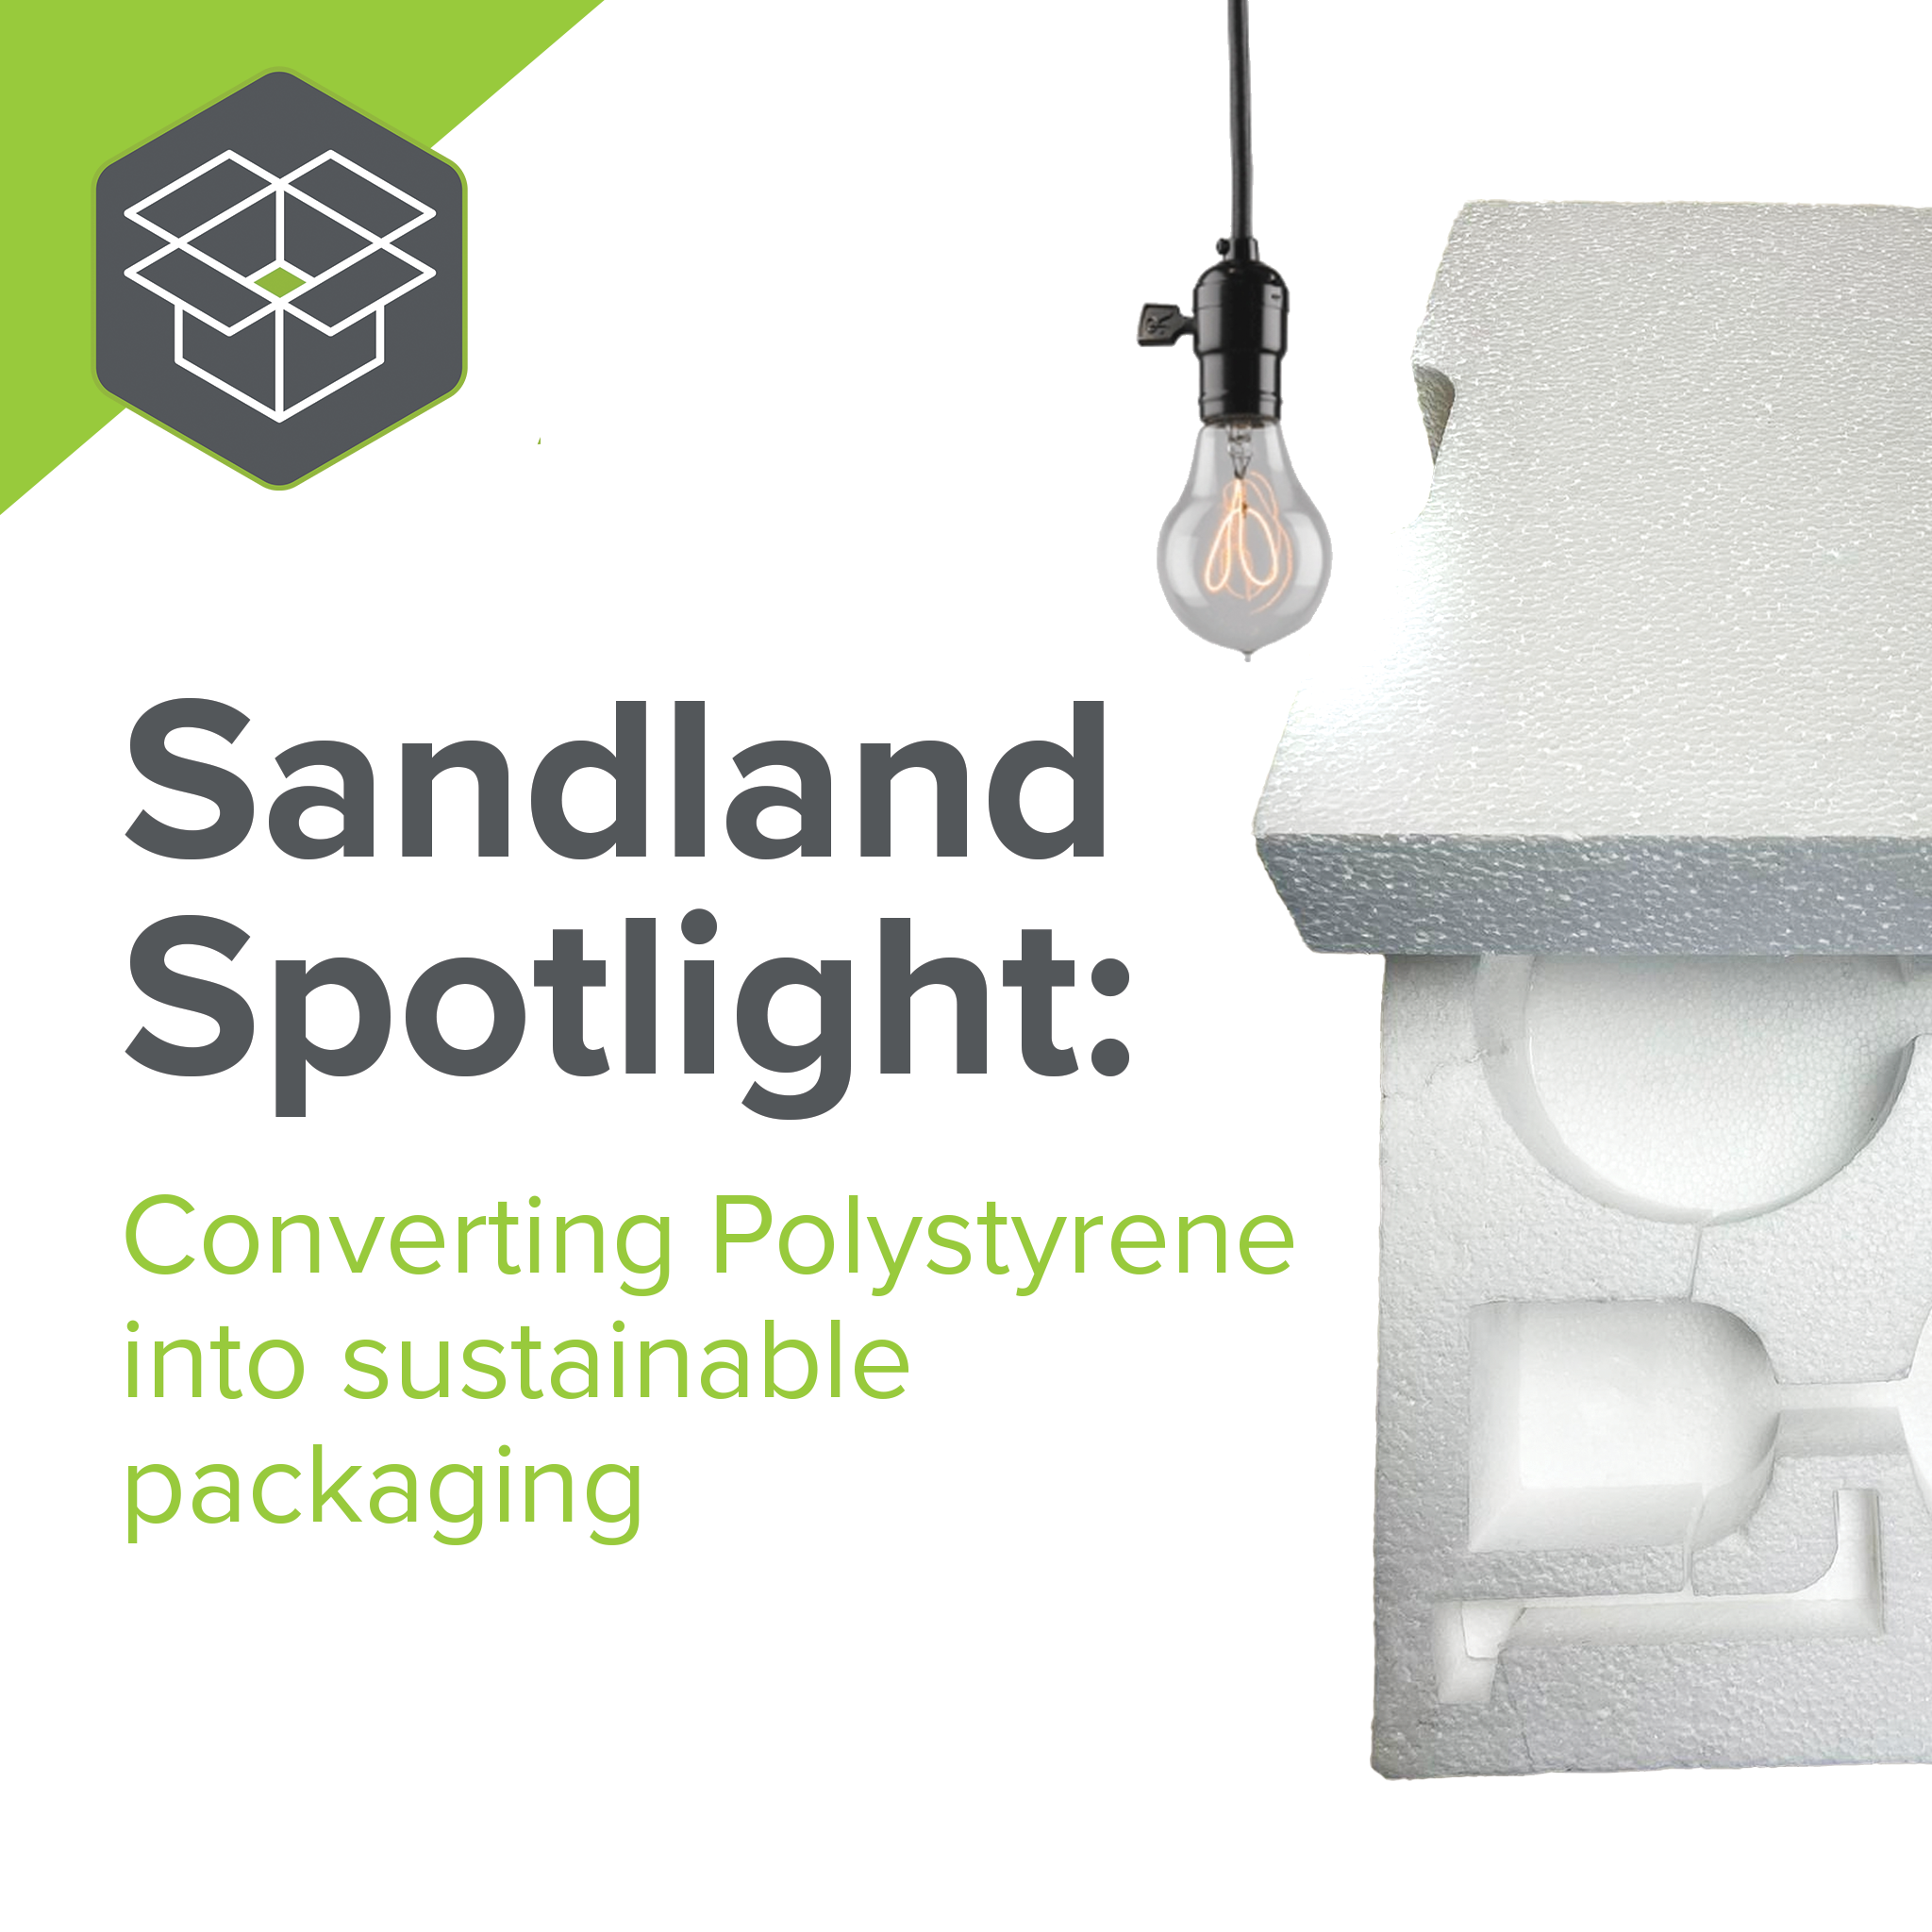 Converting Polystyrene to Sustainable Packaging